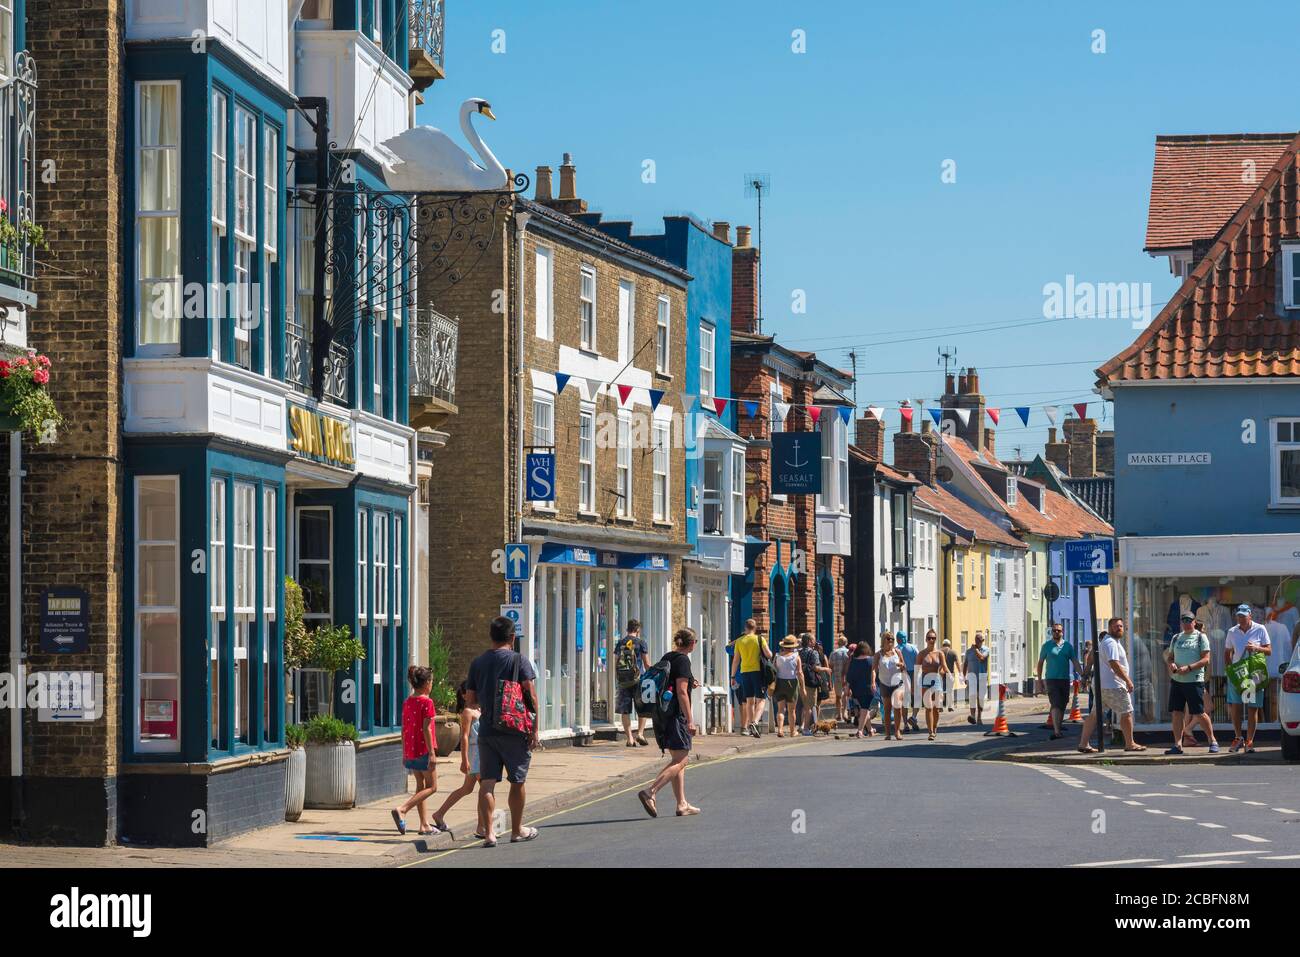 Southwold Suffolk, view in summer of people walking in the High Street in the centre of the coastal resort town of Southwold, Suffolk, East Anglia, UK Stock Photo